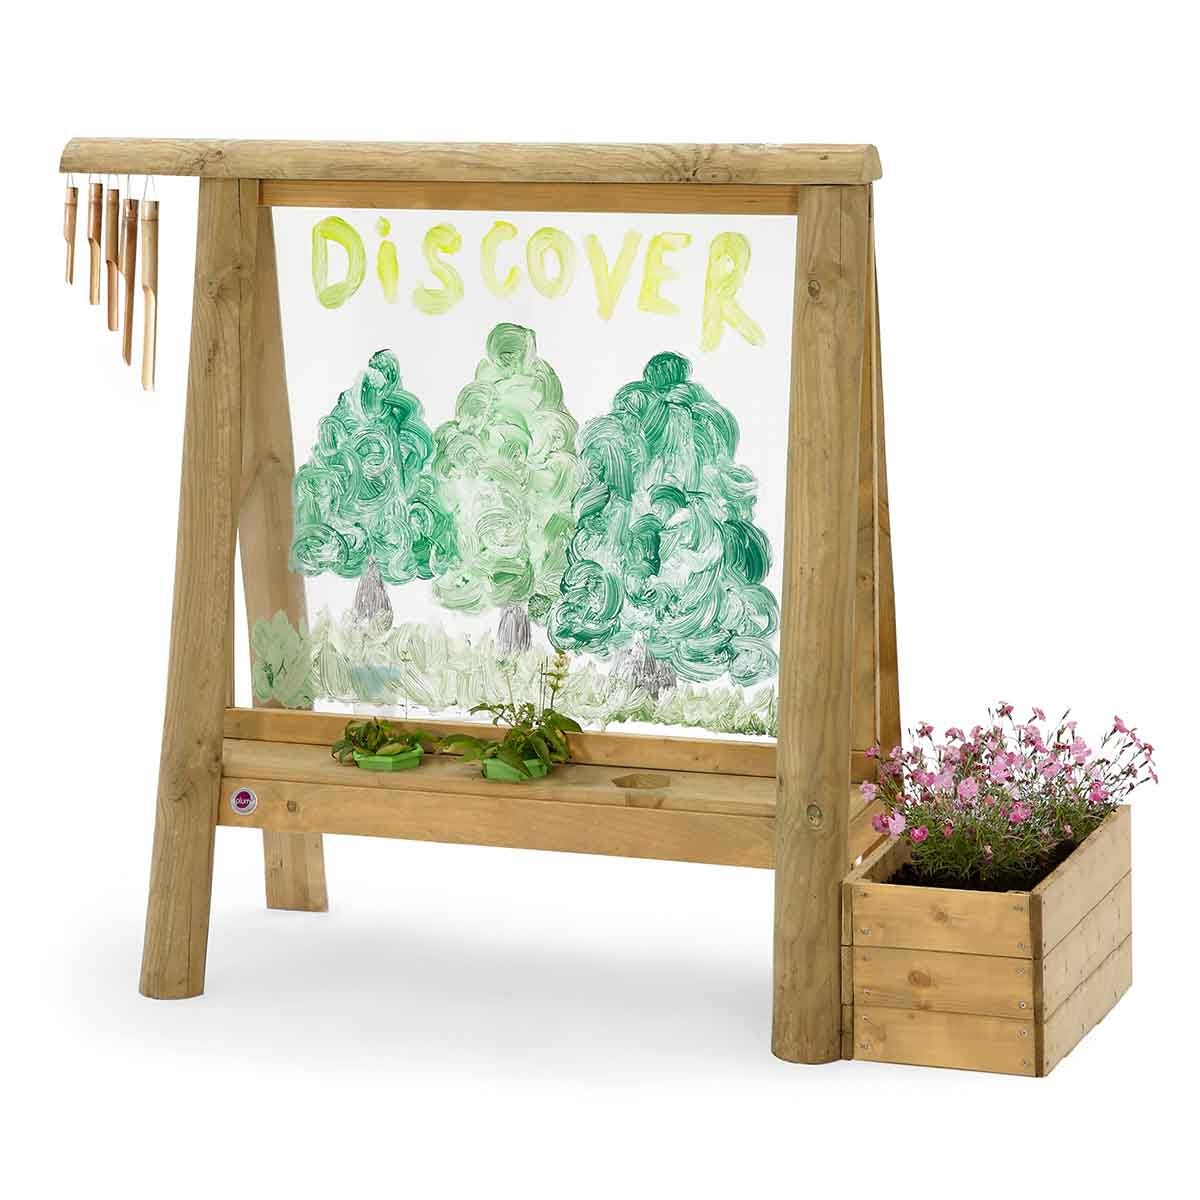 Plum Discovery Create and Paint Children's Easel